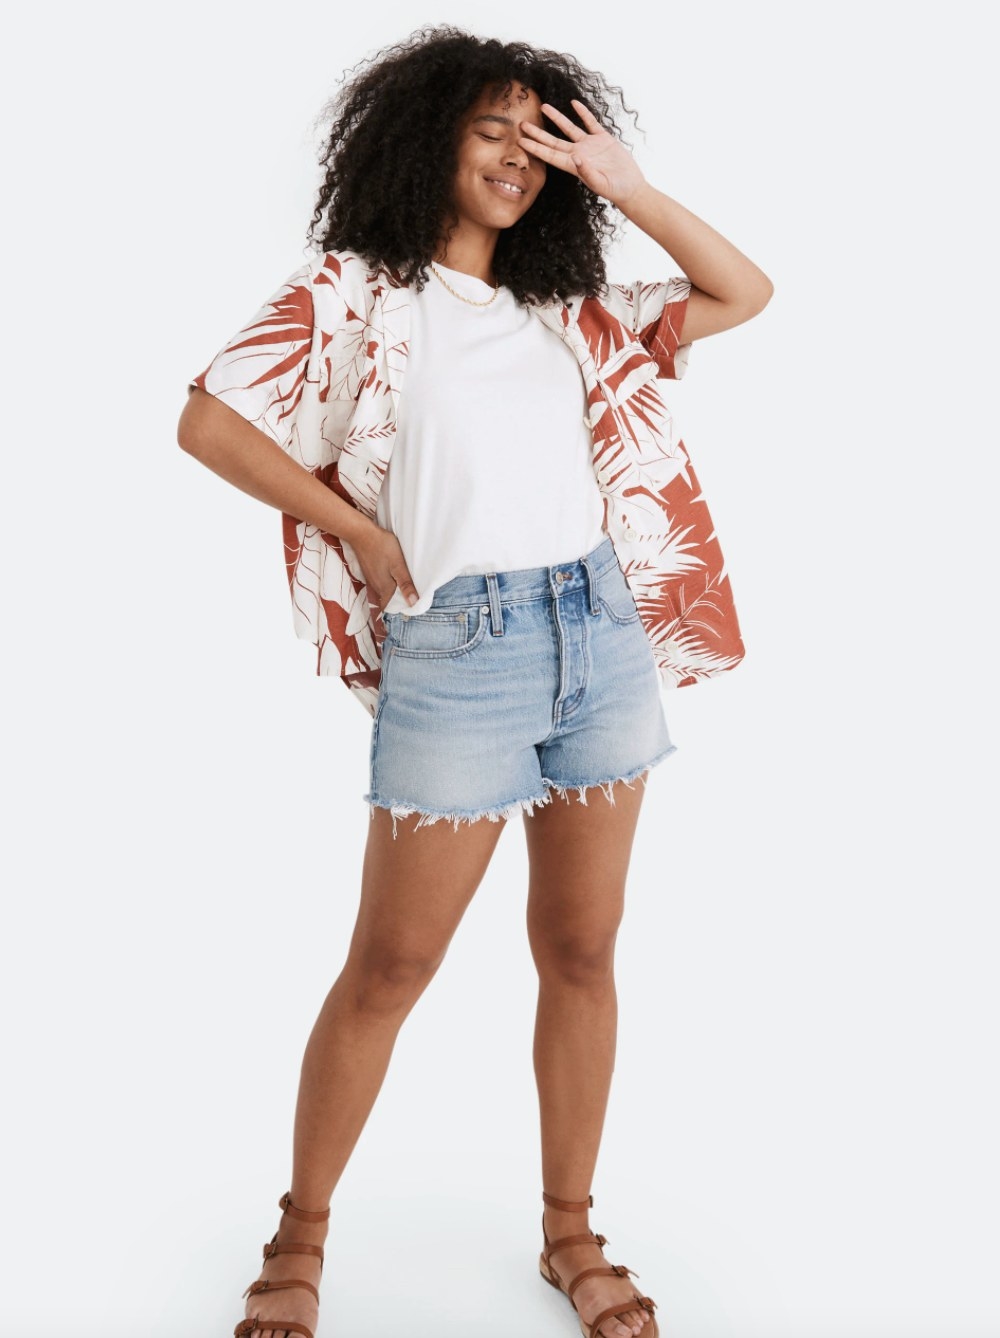 the Madewell denim shorts on a model